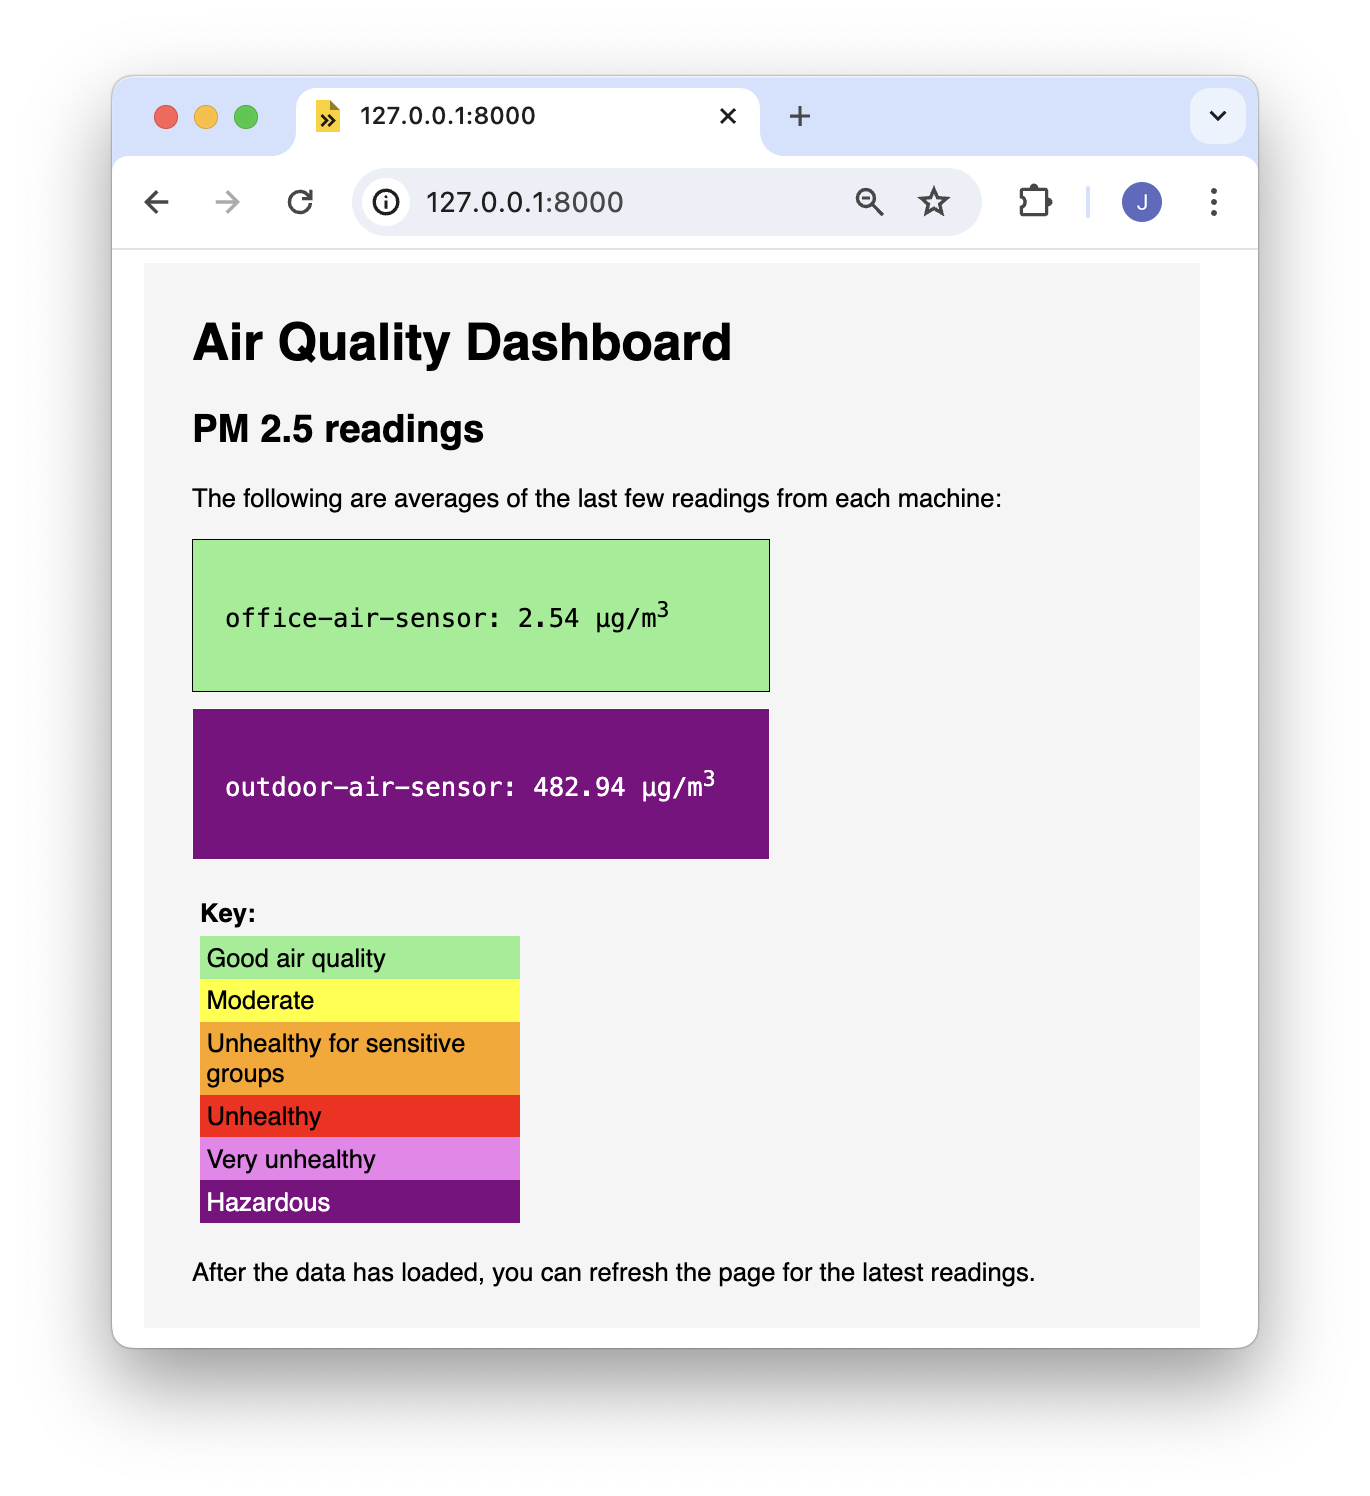 The air quality dashboard you’ll build. This one has PM2.5 readings from two different sensor machines displayed, and a key with categories of air quality.